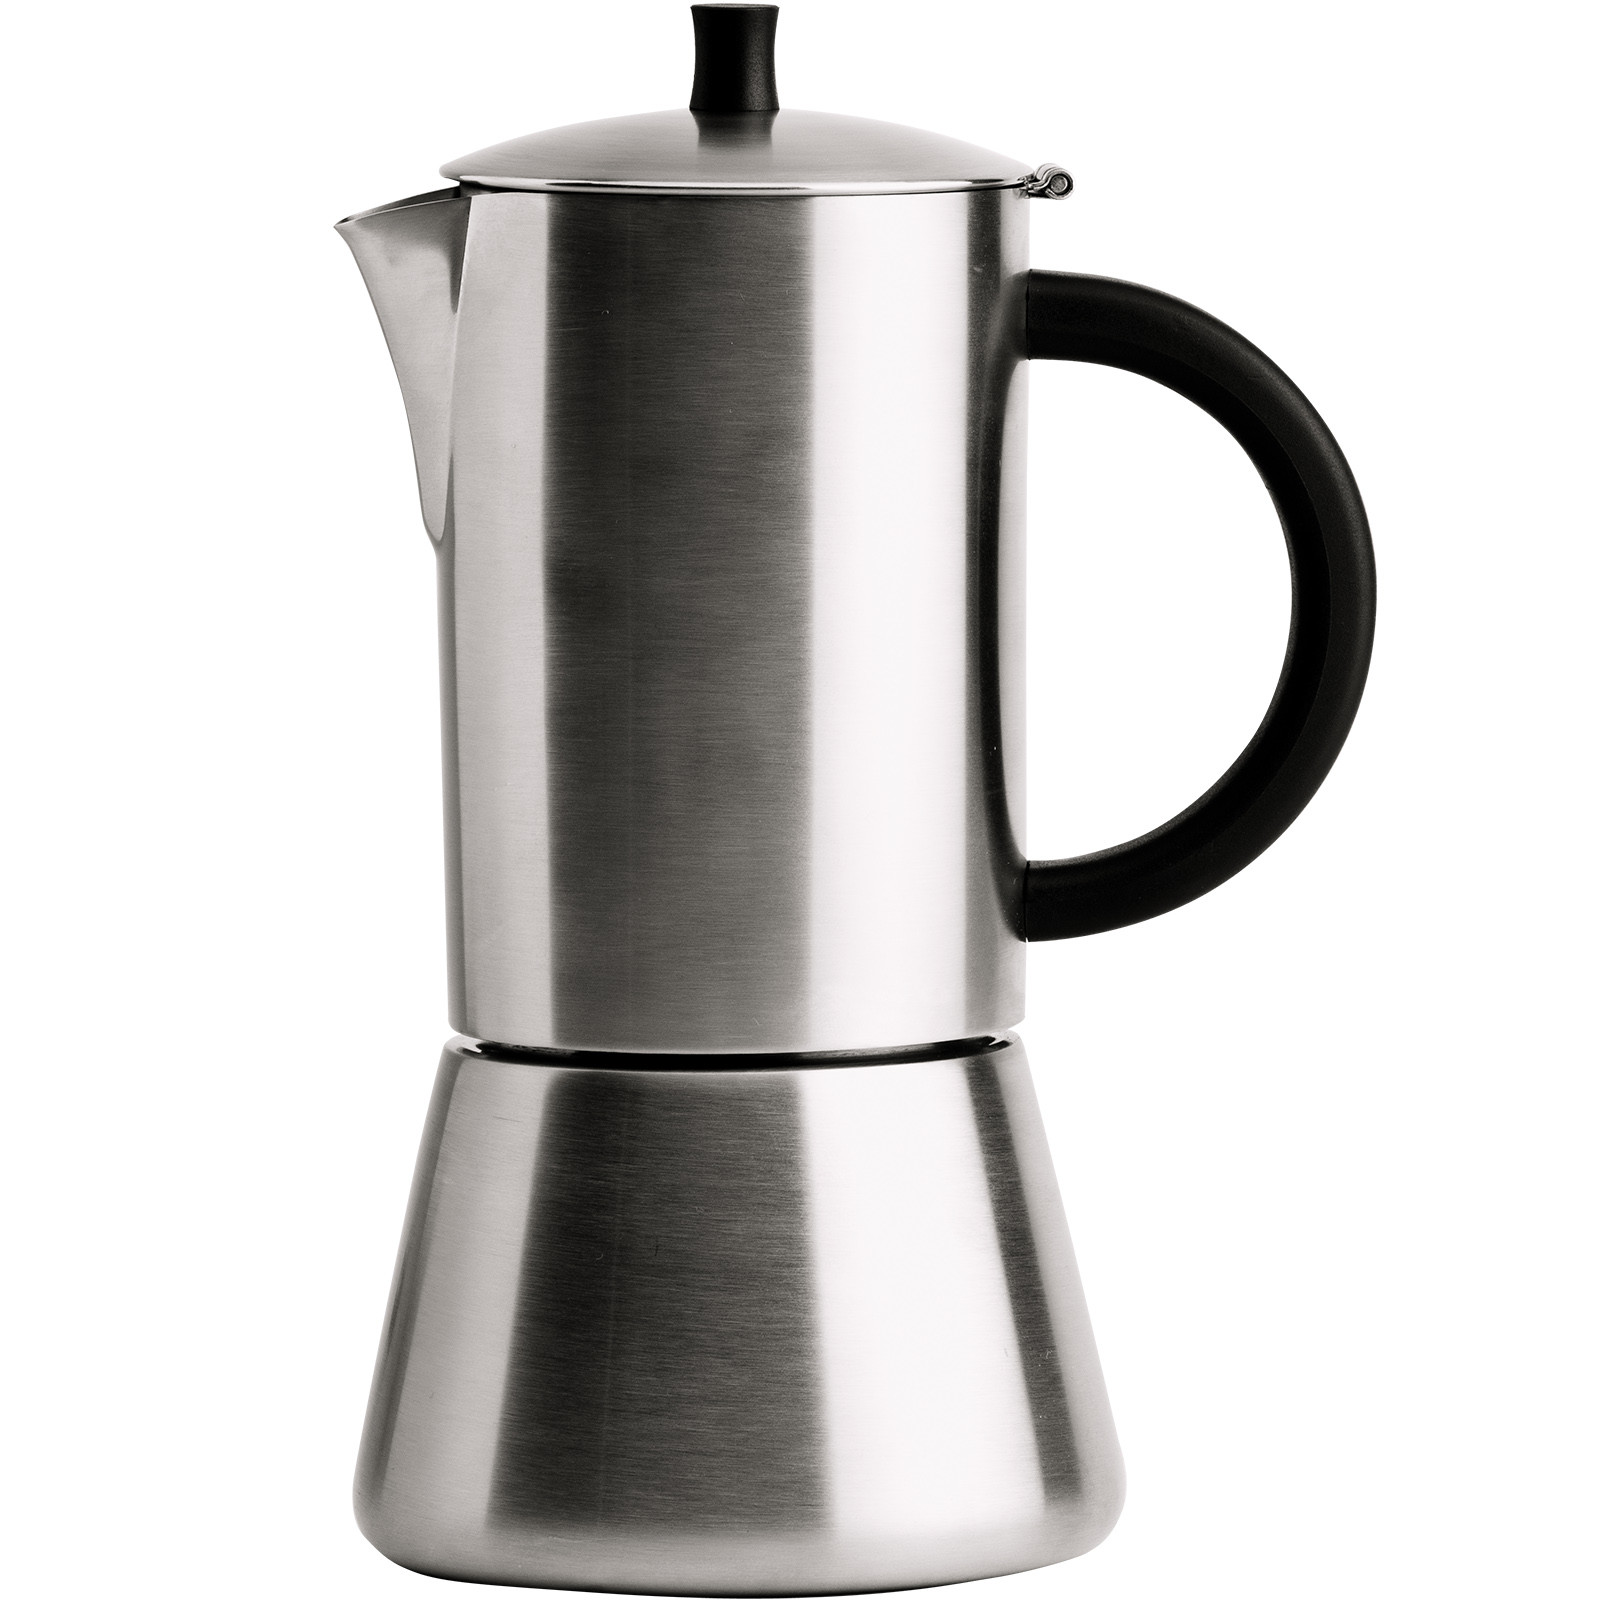 Cafetière italienne inox Palermo, cafetière italienne induction